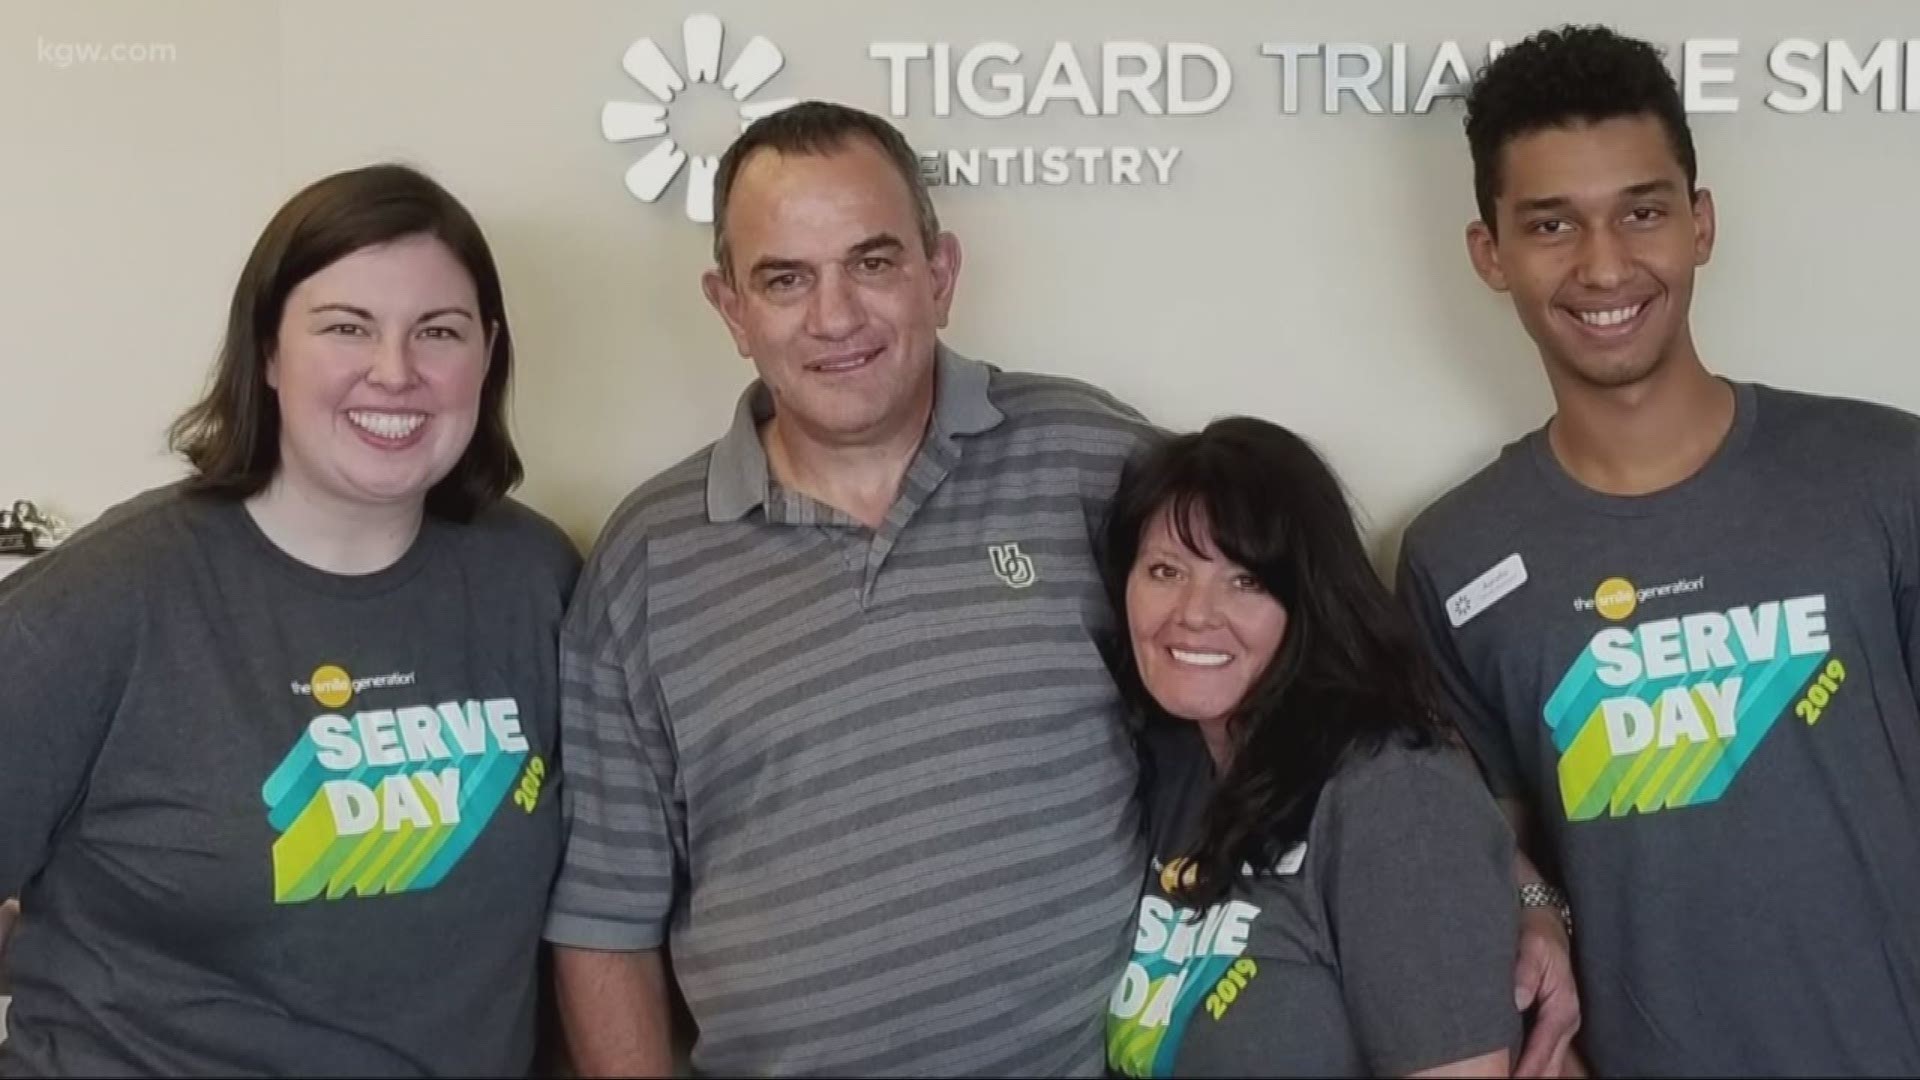 The life of Oregon man Chris Boots is forever changed by the eight years he spent in prison for a crime he didn’t commit. This week, a Tigard dentist offered to right some of the wrong by restoring his smile. Boots is now 56. He was wrongfully convicted when he was 23.